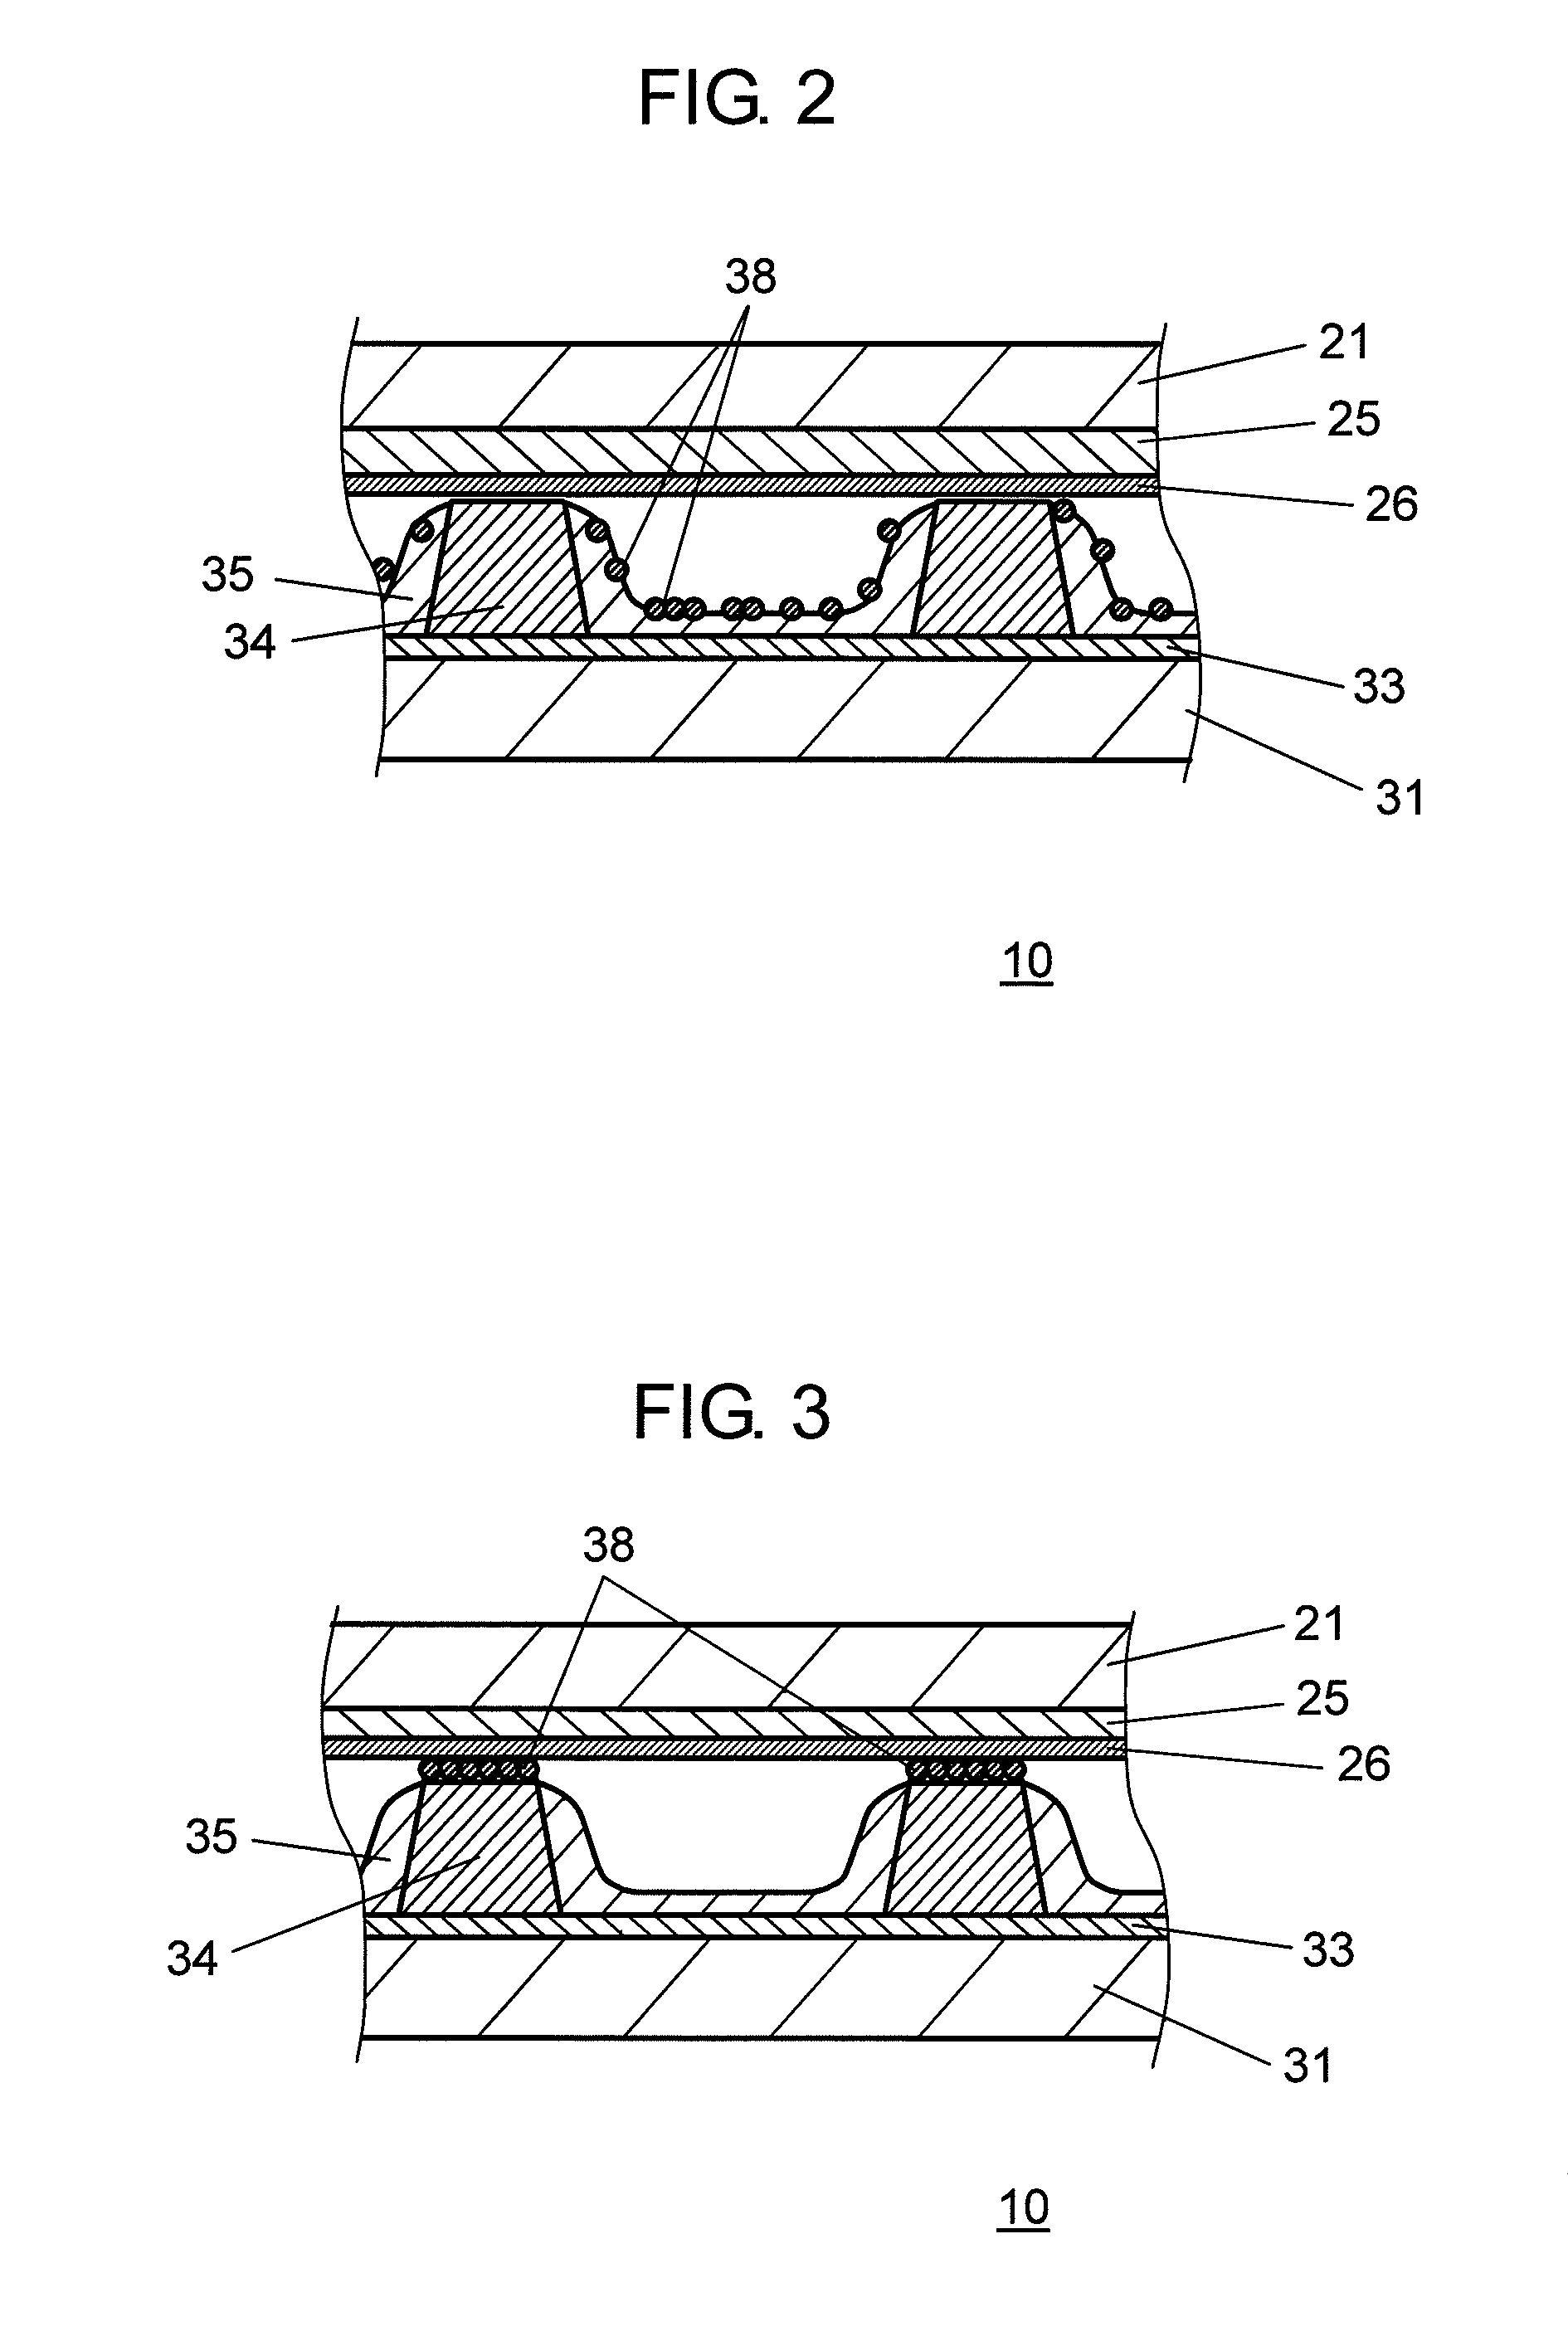 Plasma display panel incorporating a hydrogen-absorbing material